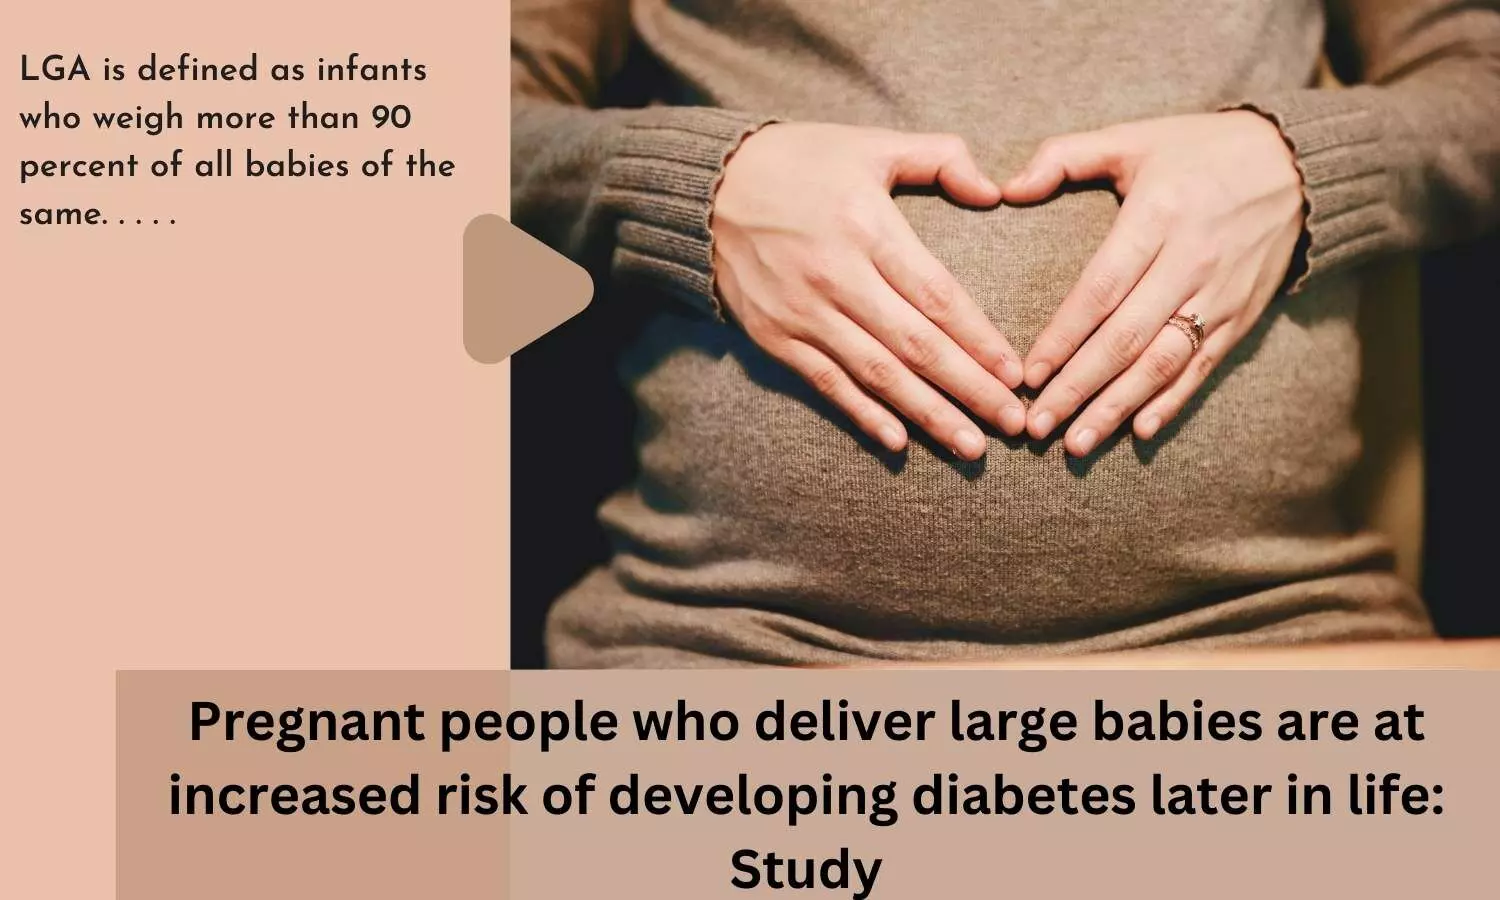 Pregnant people who deliver large babies are at increased risk of developing diabetes later in life: Study